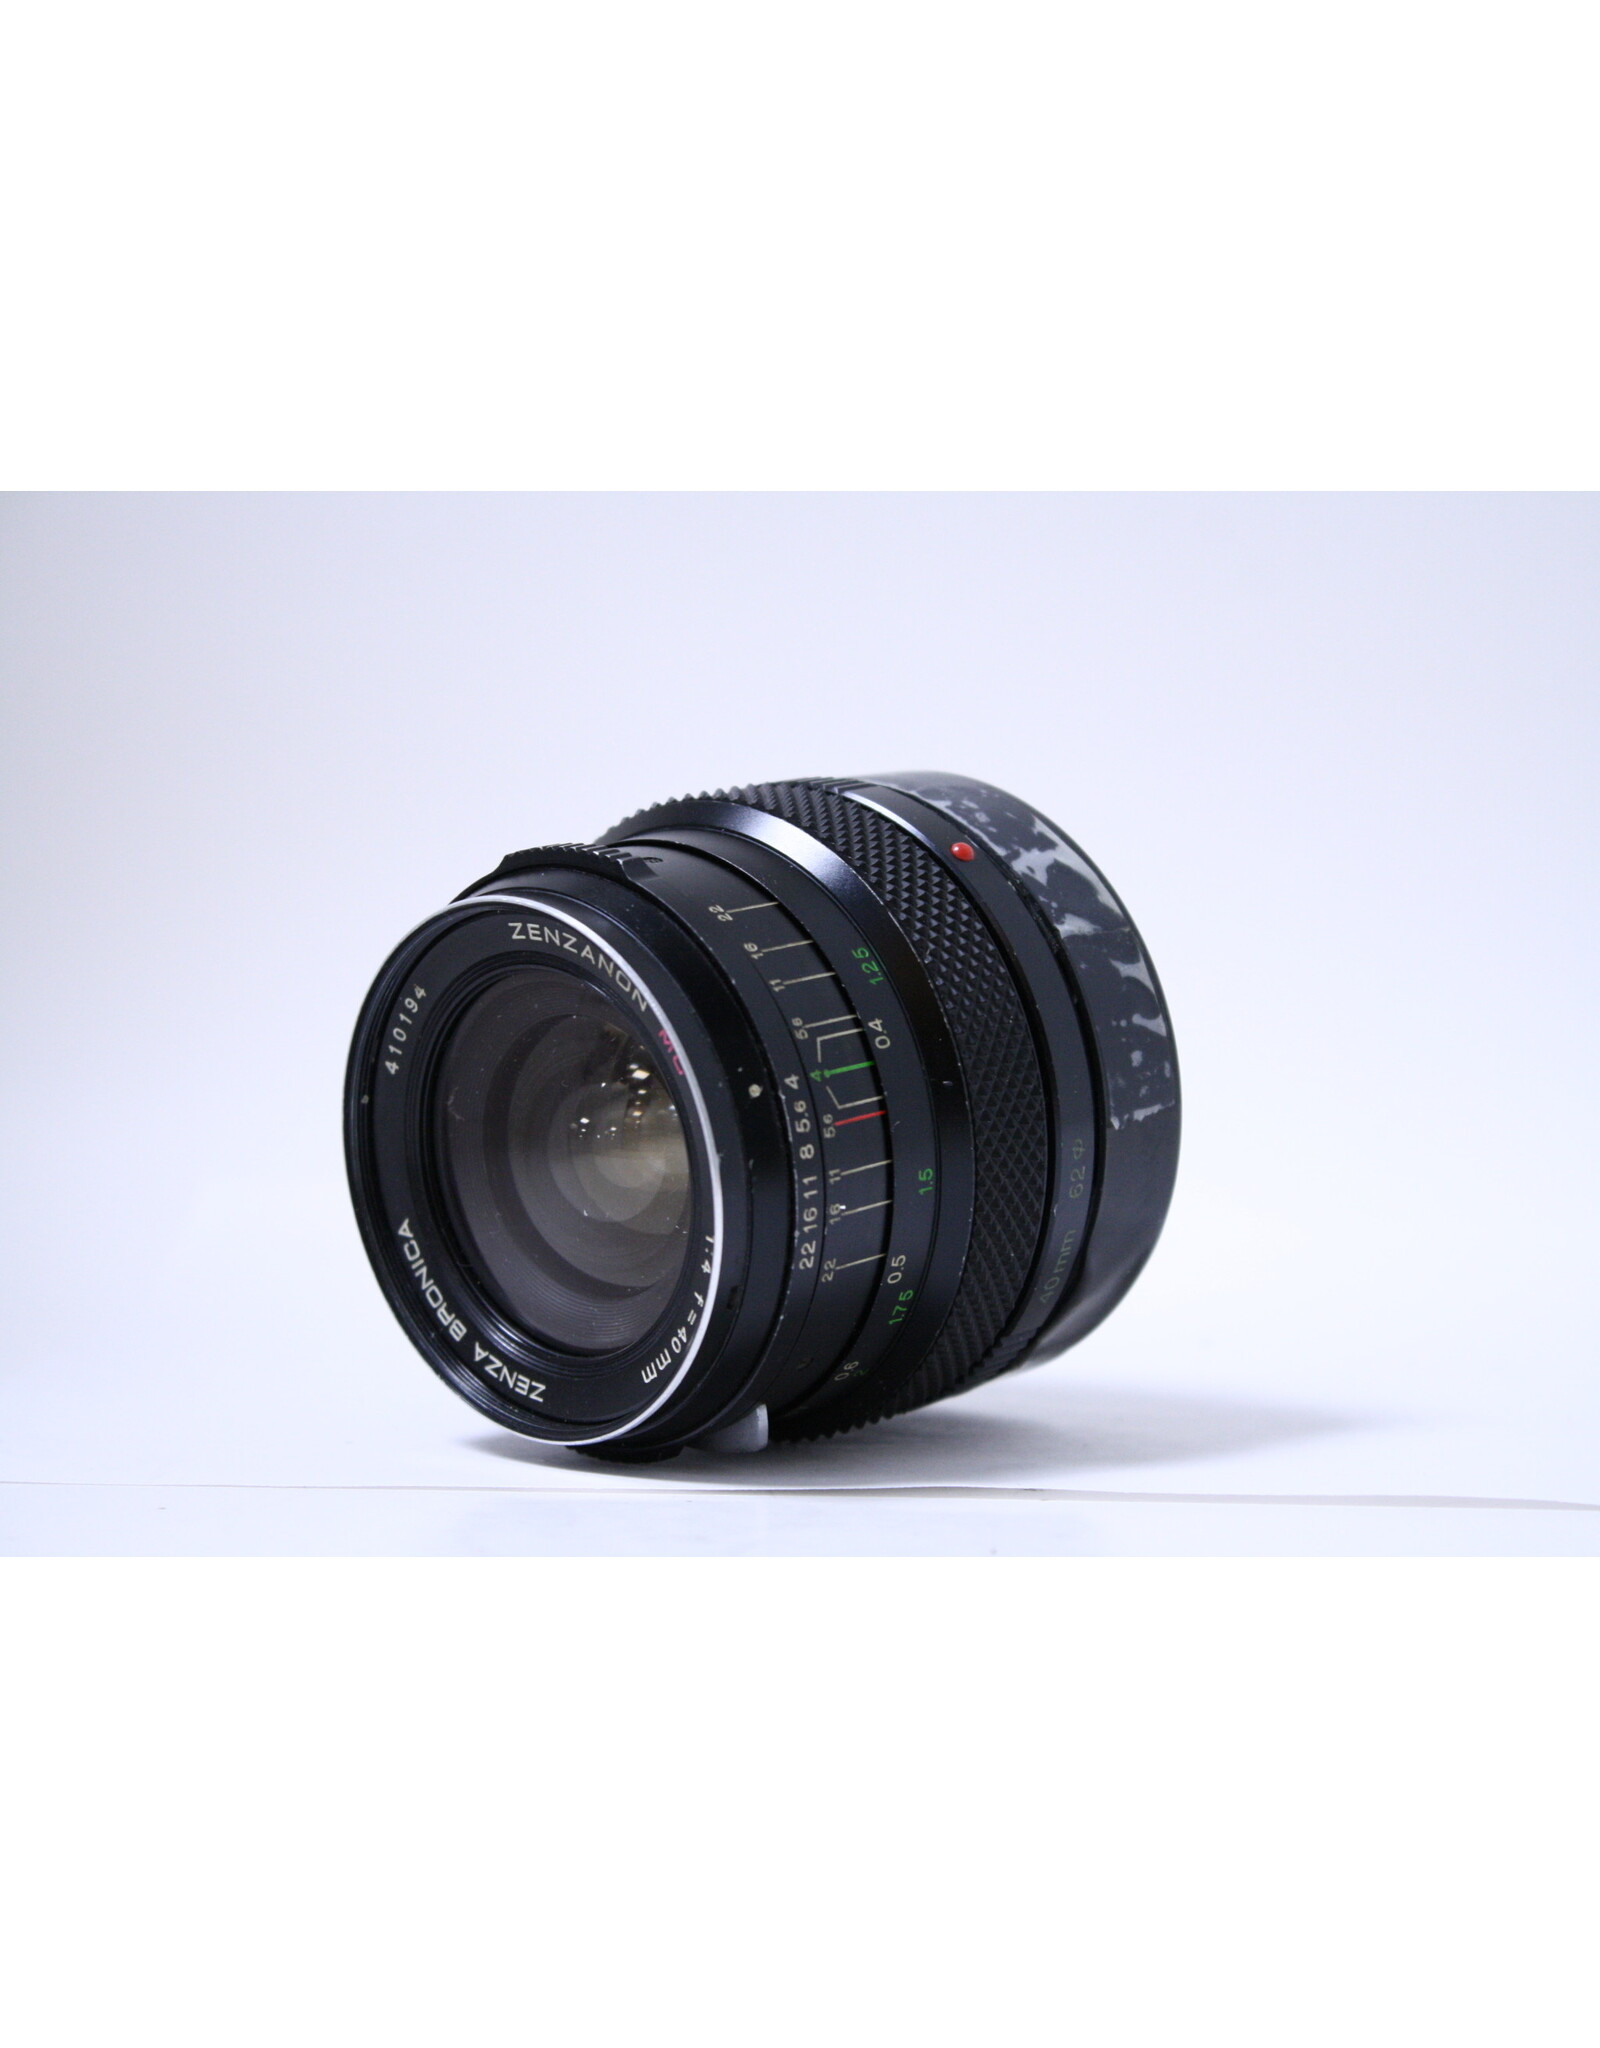 Bronica Zenzanon MC 40mm f4 Lens for Bronica ETR  (Pre-owned)